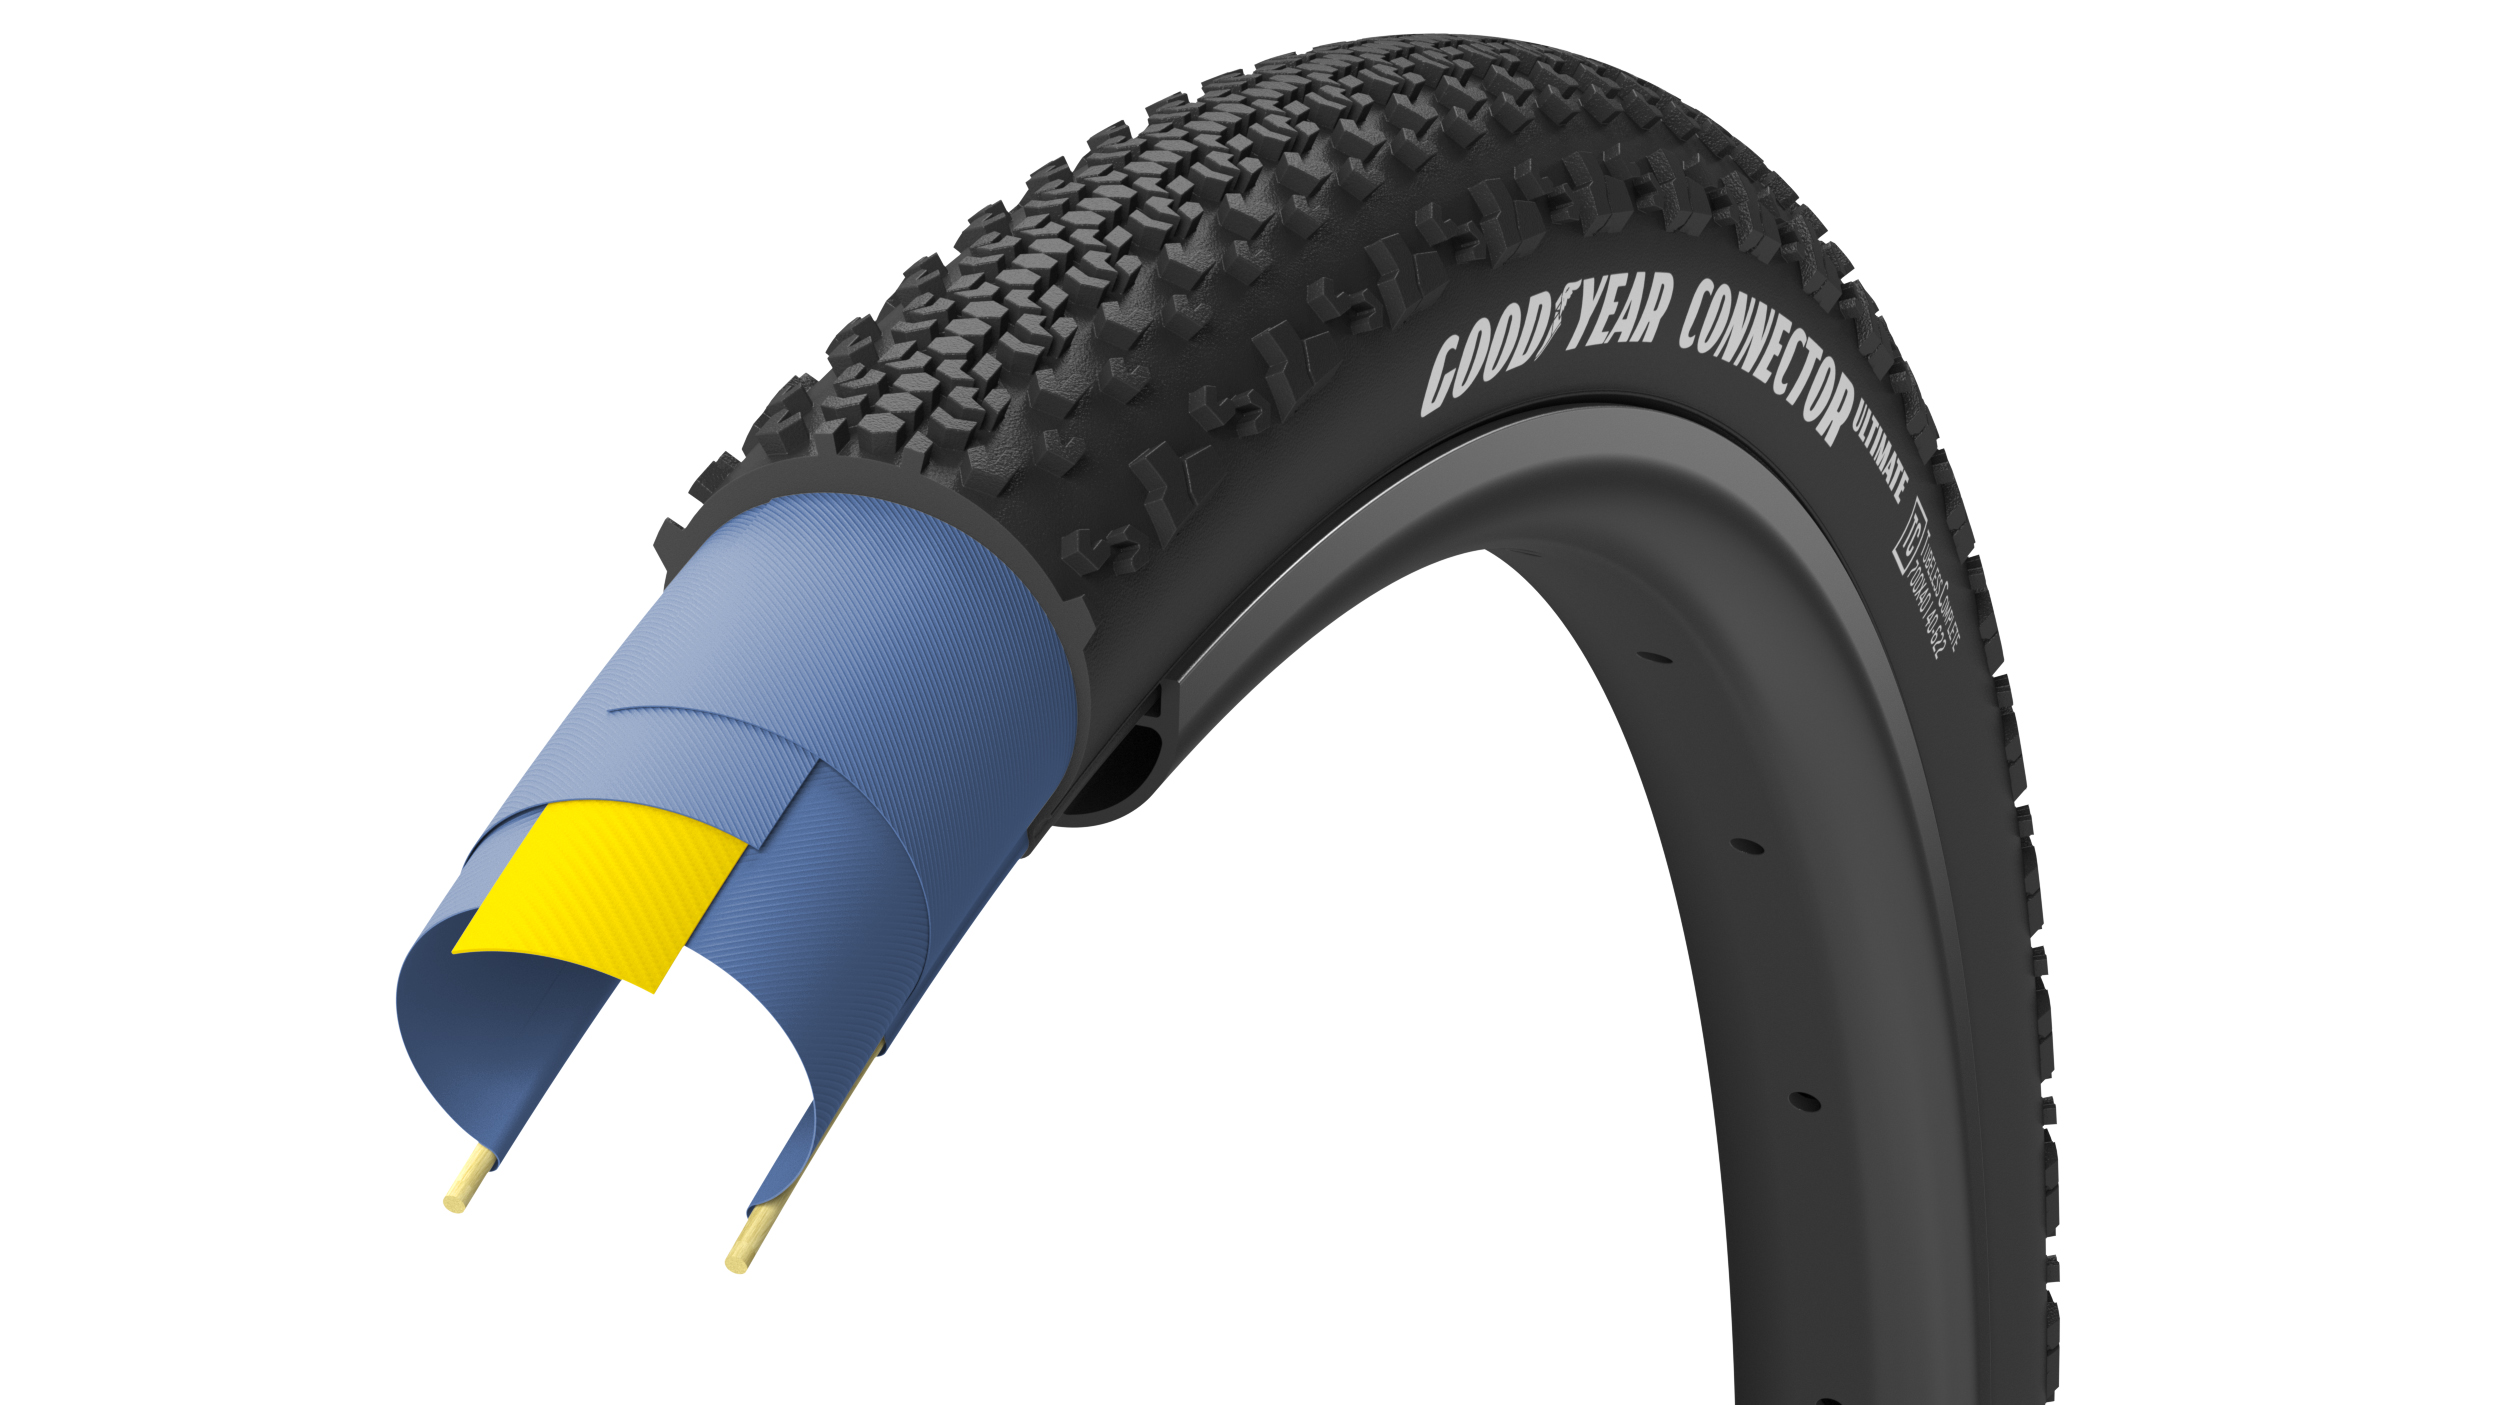 Покришка 700x50 (50-622) GoodYear CONNECTOR tubeless complete, folding, black, 120tpi фото 